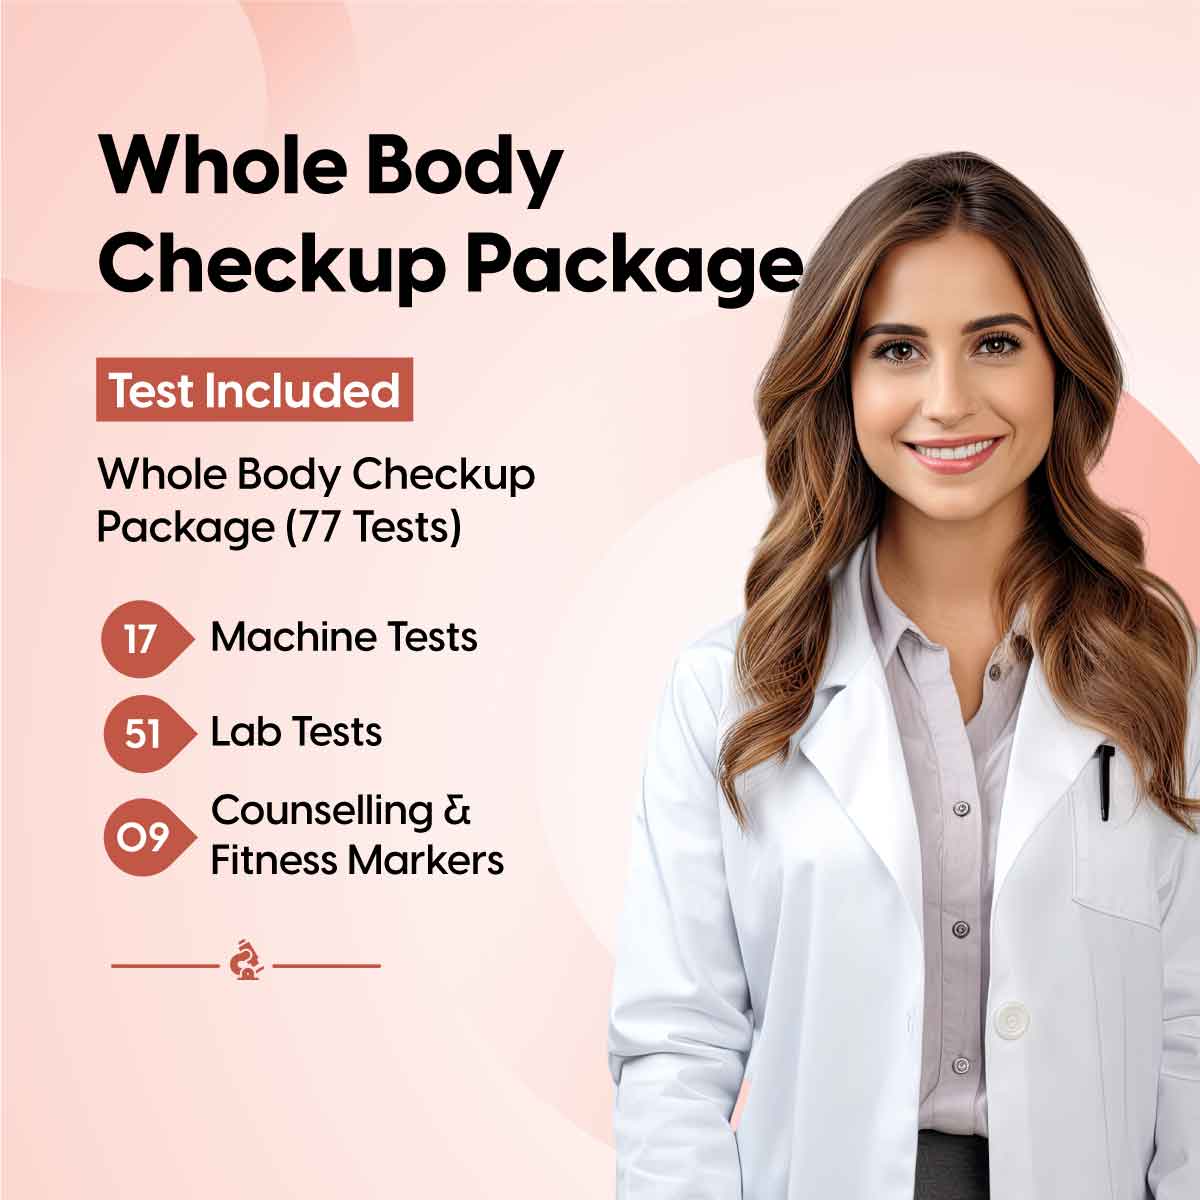 Whole Body Checkup Package